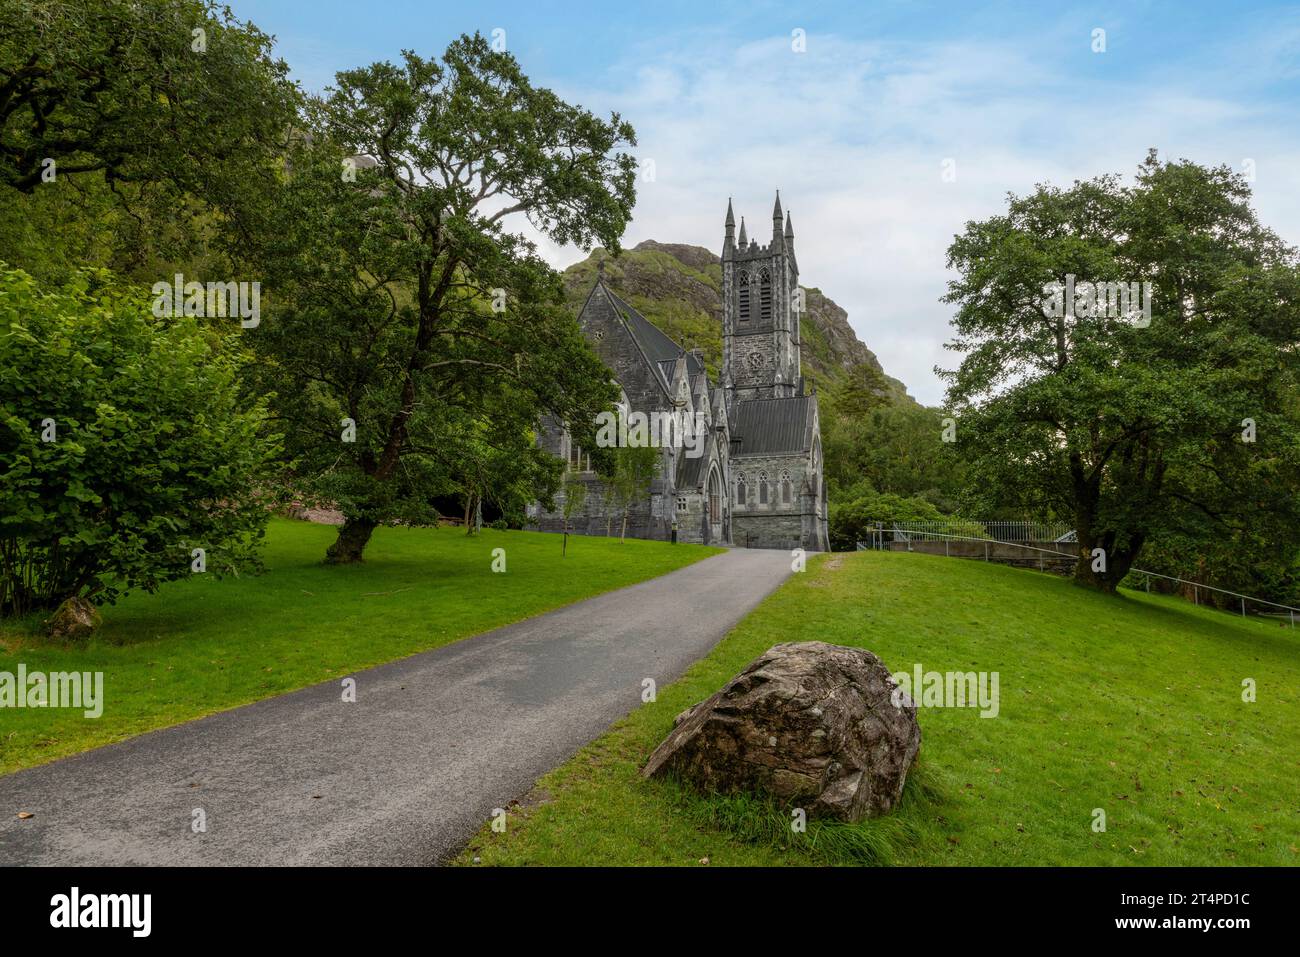 Kylemore Abbey is a 19th-century Benedictine monastery with Gothic Revival architecture and Victorian walled gardens in Connemara, Ireland. Stock Photo